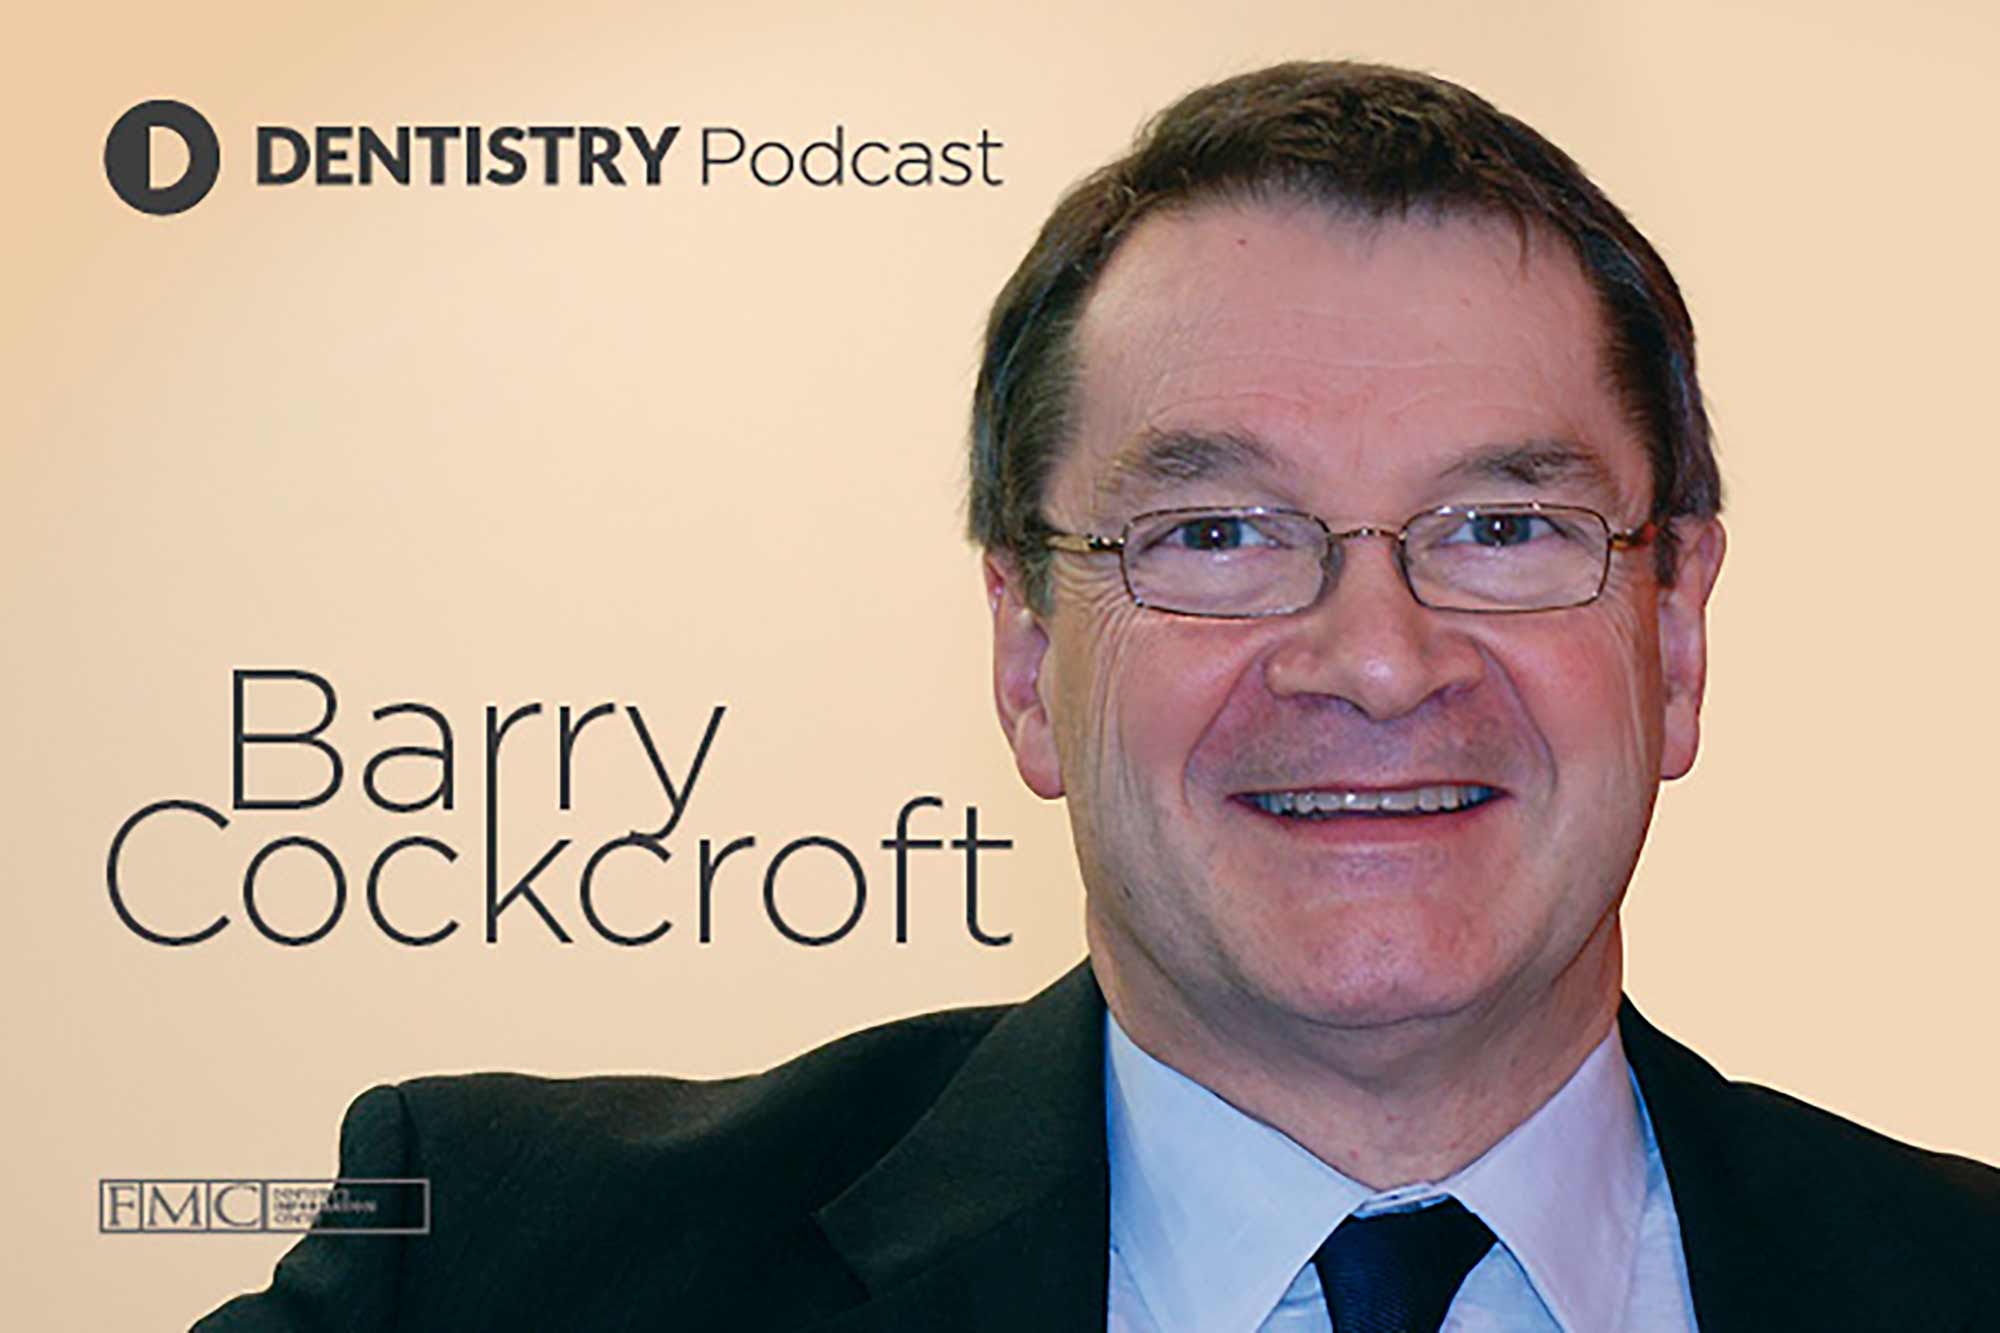 In this week's podcast we chat to Barry Cockcroft about evidence-based prevention and why it's now more relevant than ever